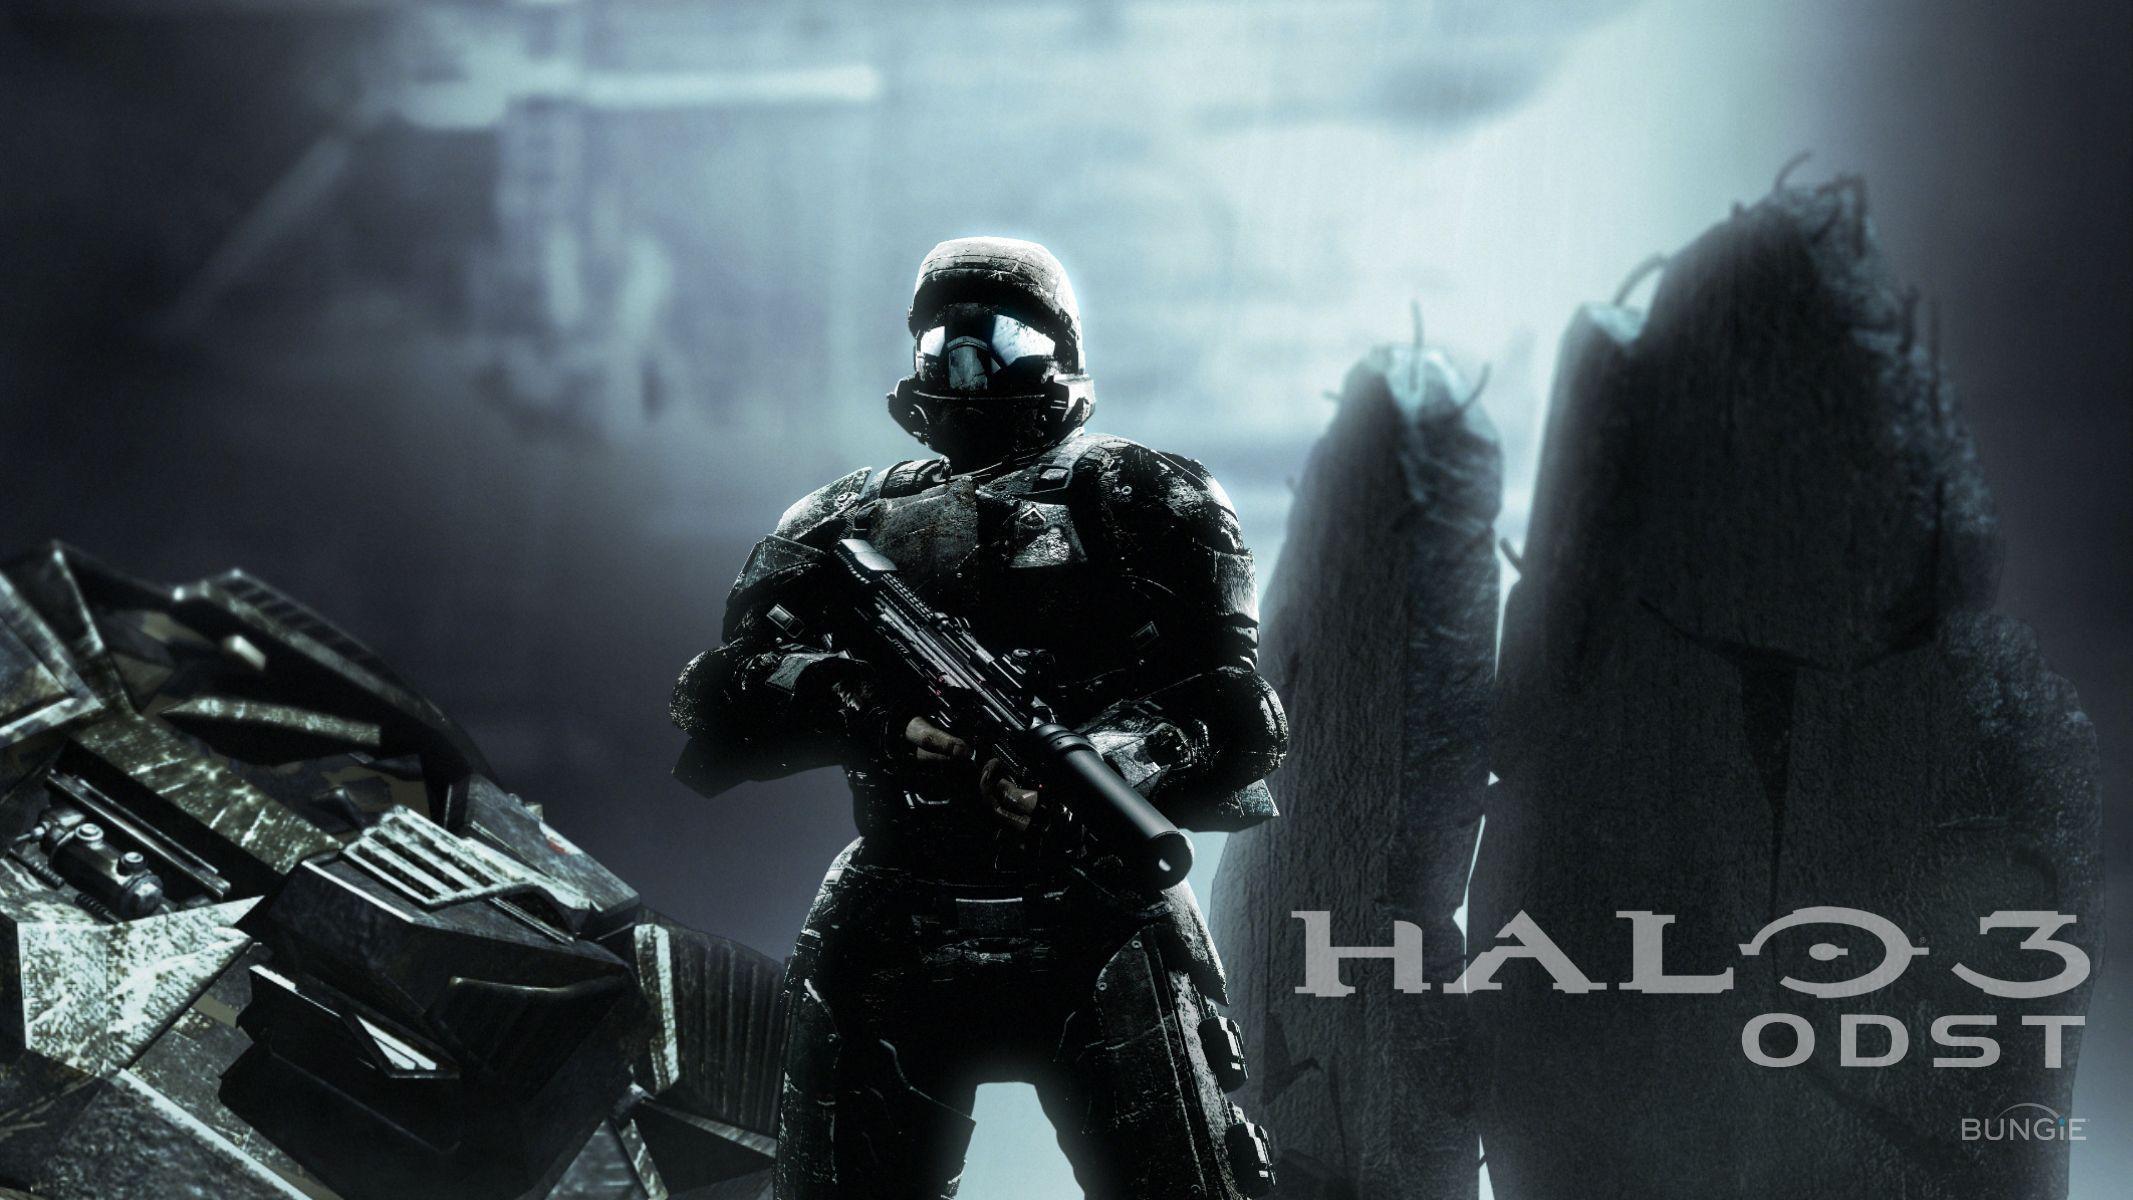 Release Date for Halo 3: ODST MCC Announced